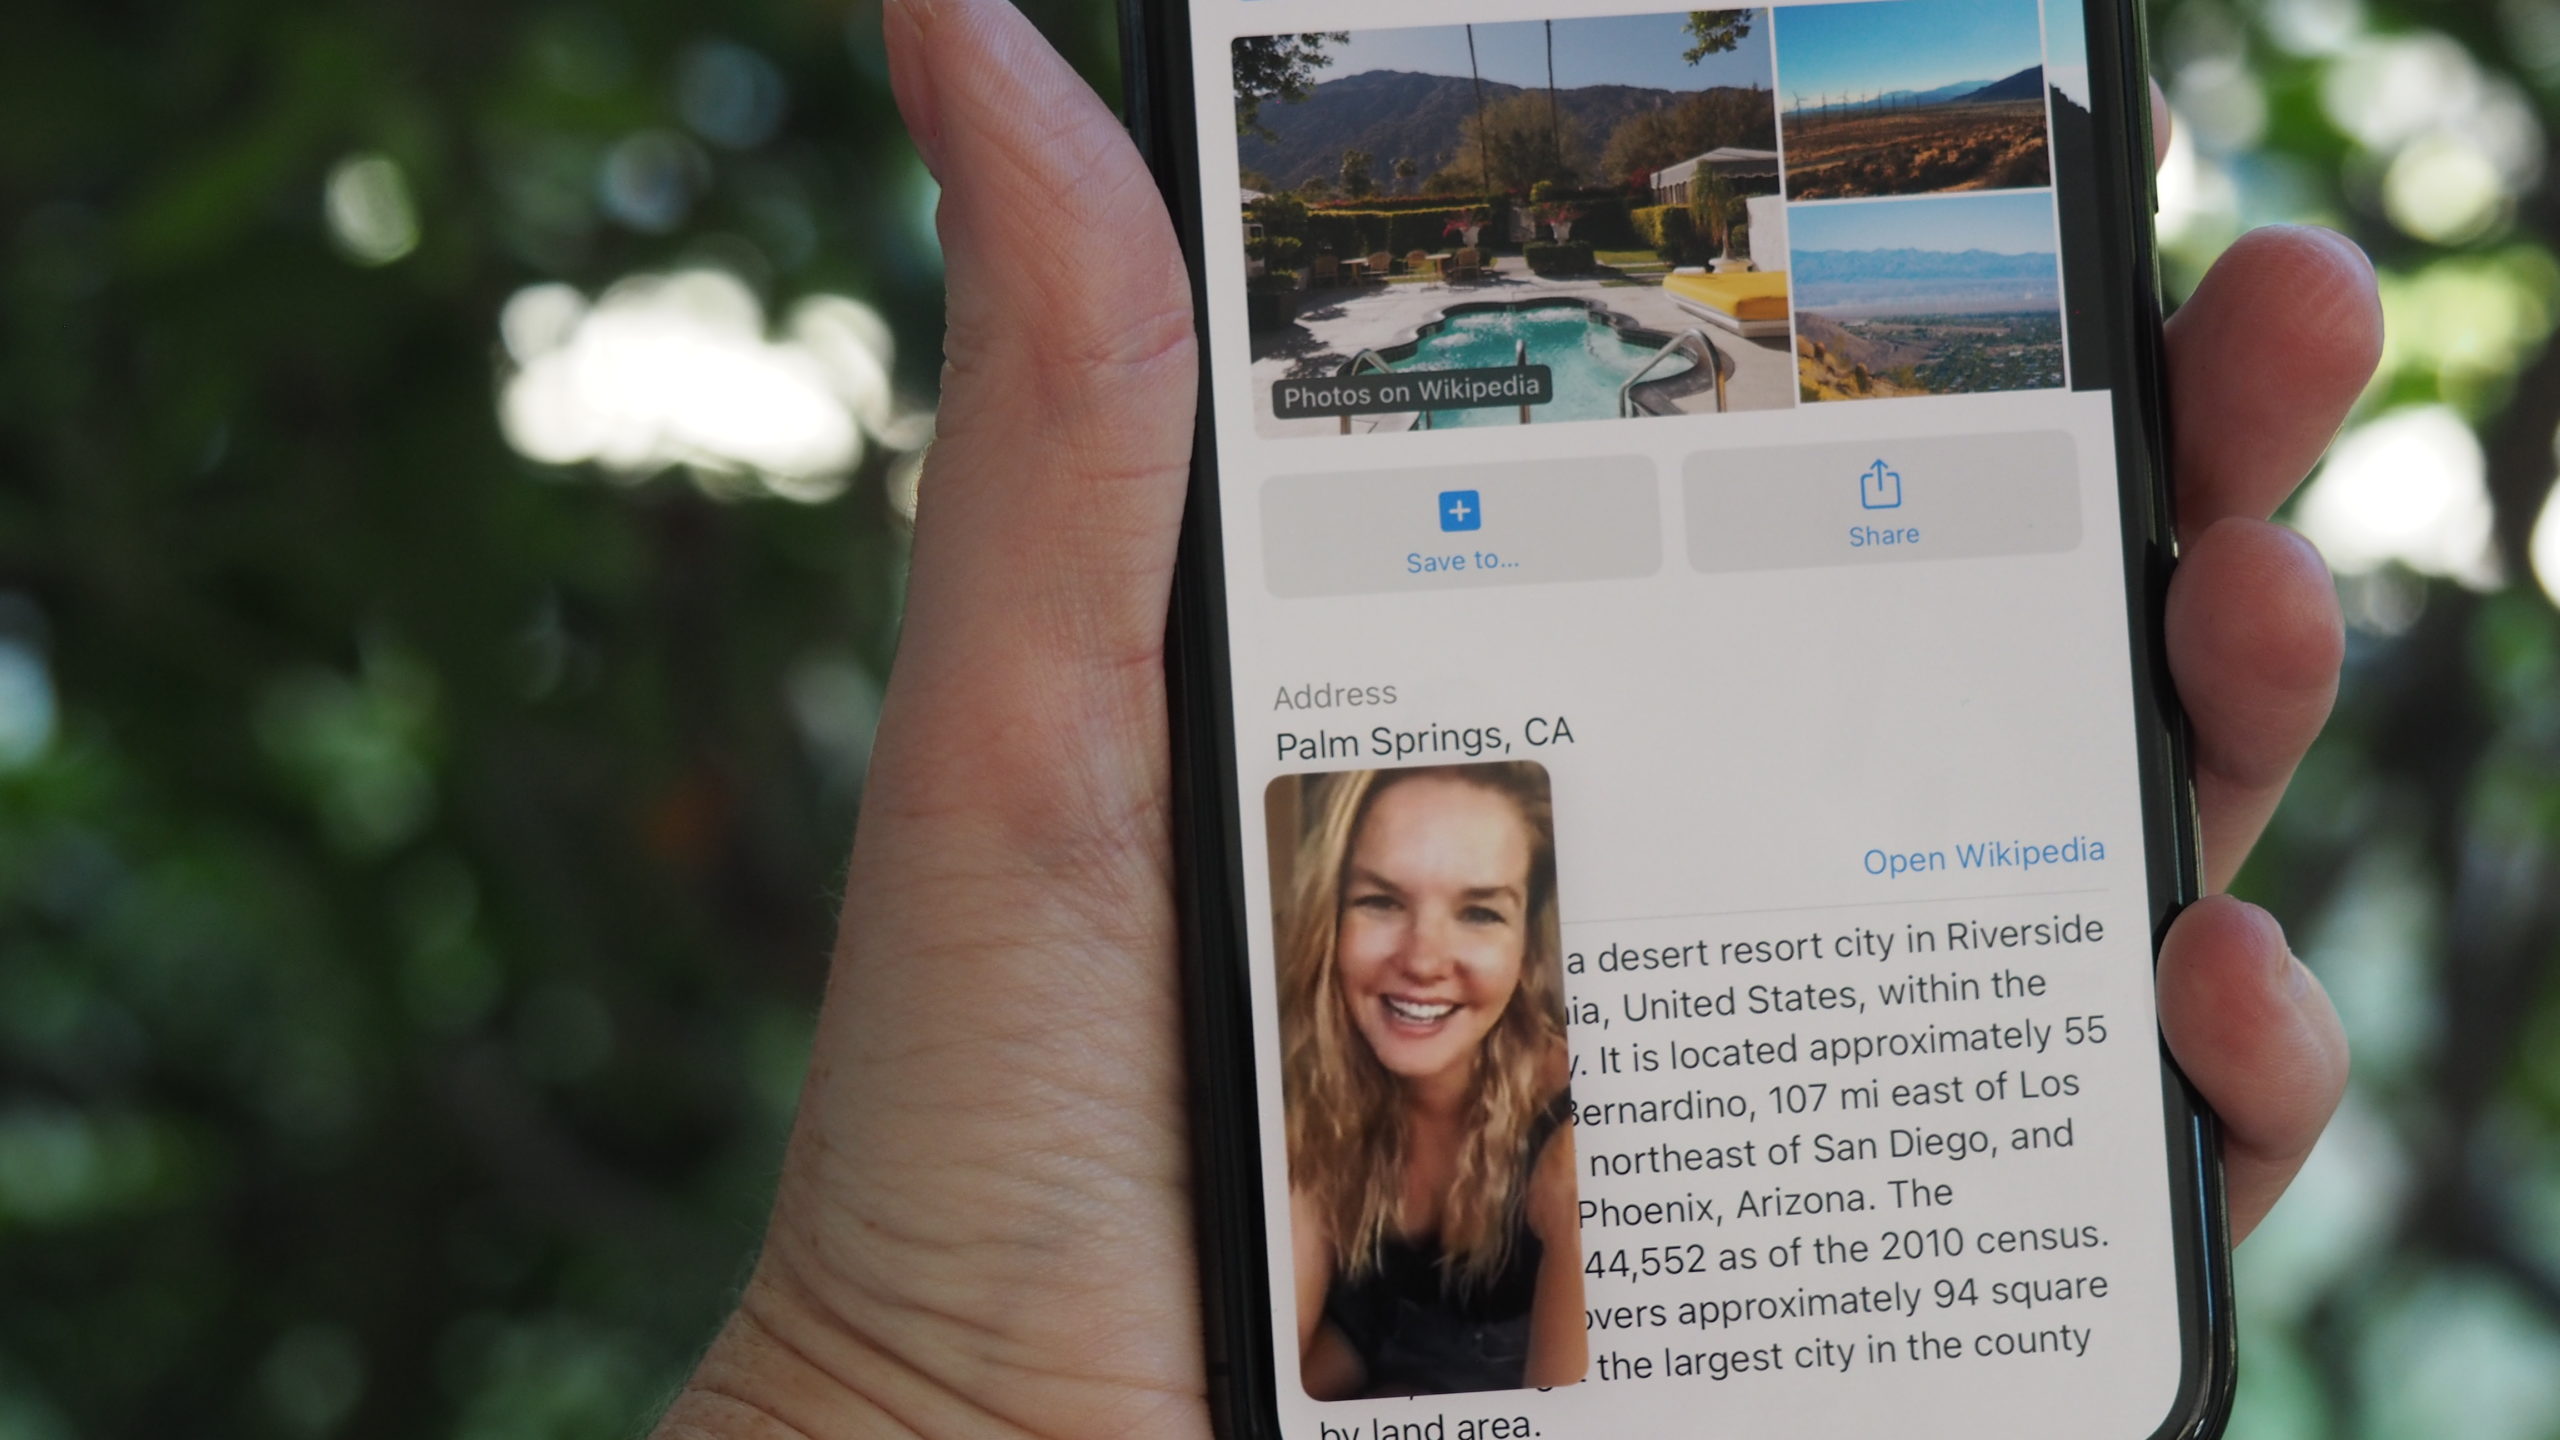 Dreaming of vacations with girlfriends over FaceTime is now much easier, thanks to iOS 14's picture-in-picture feature. (Photo: Caitlin McGarry)